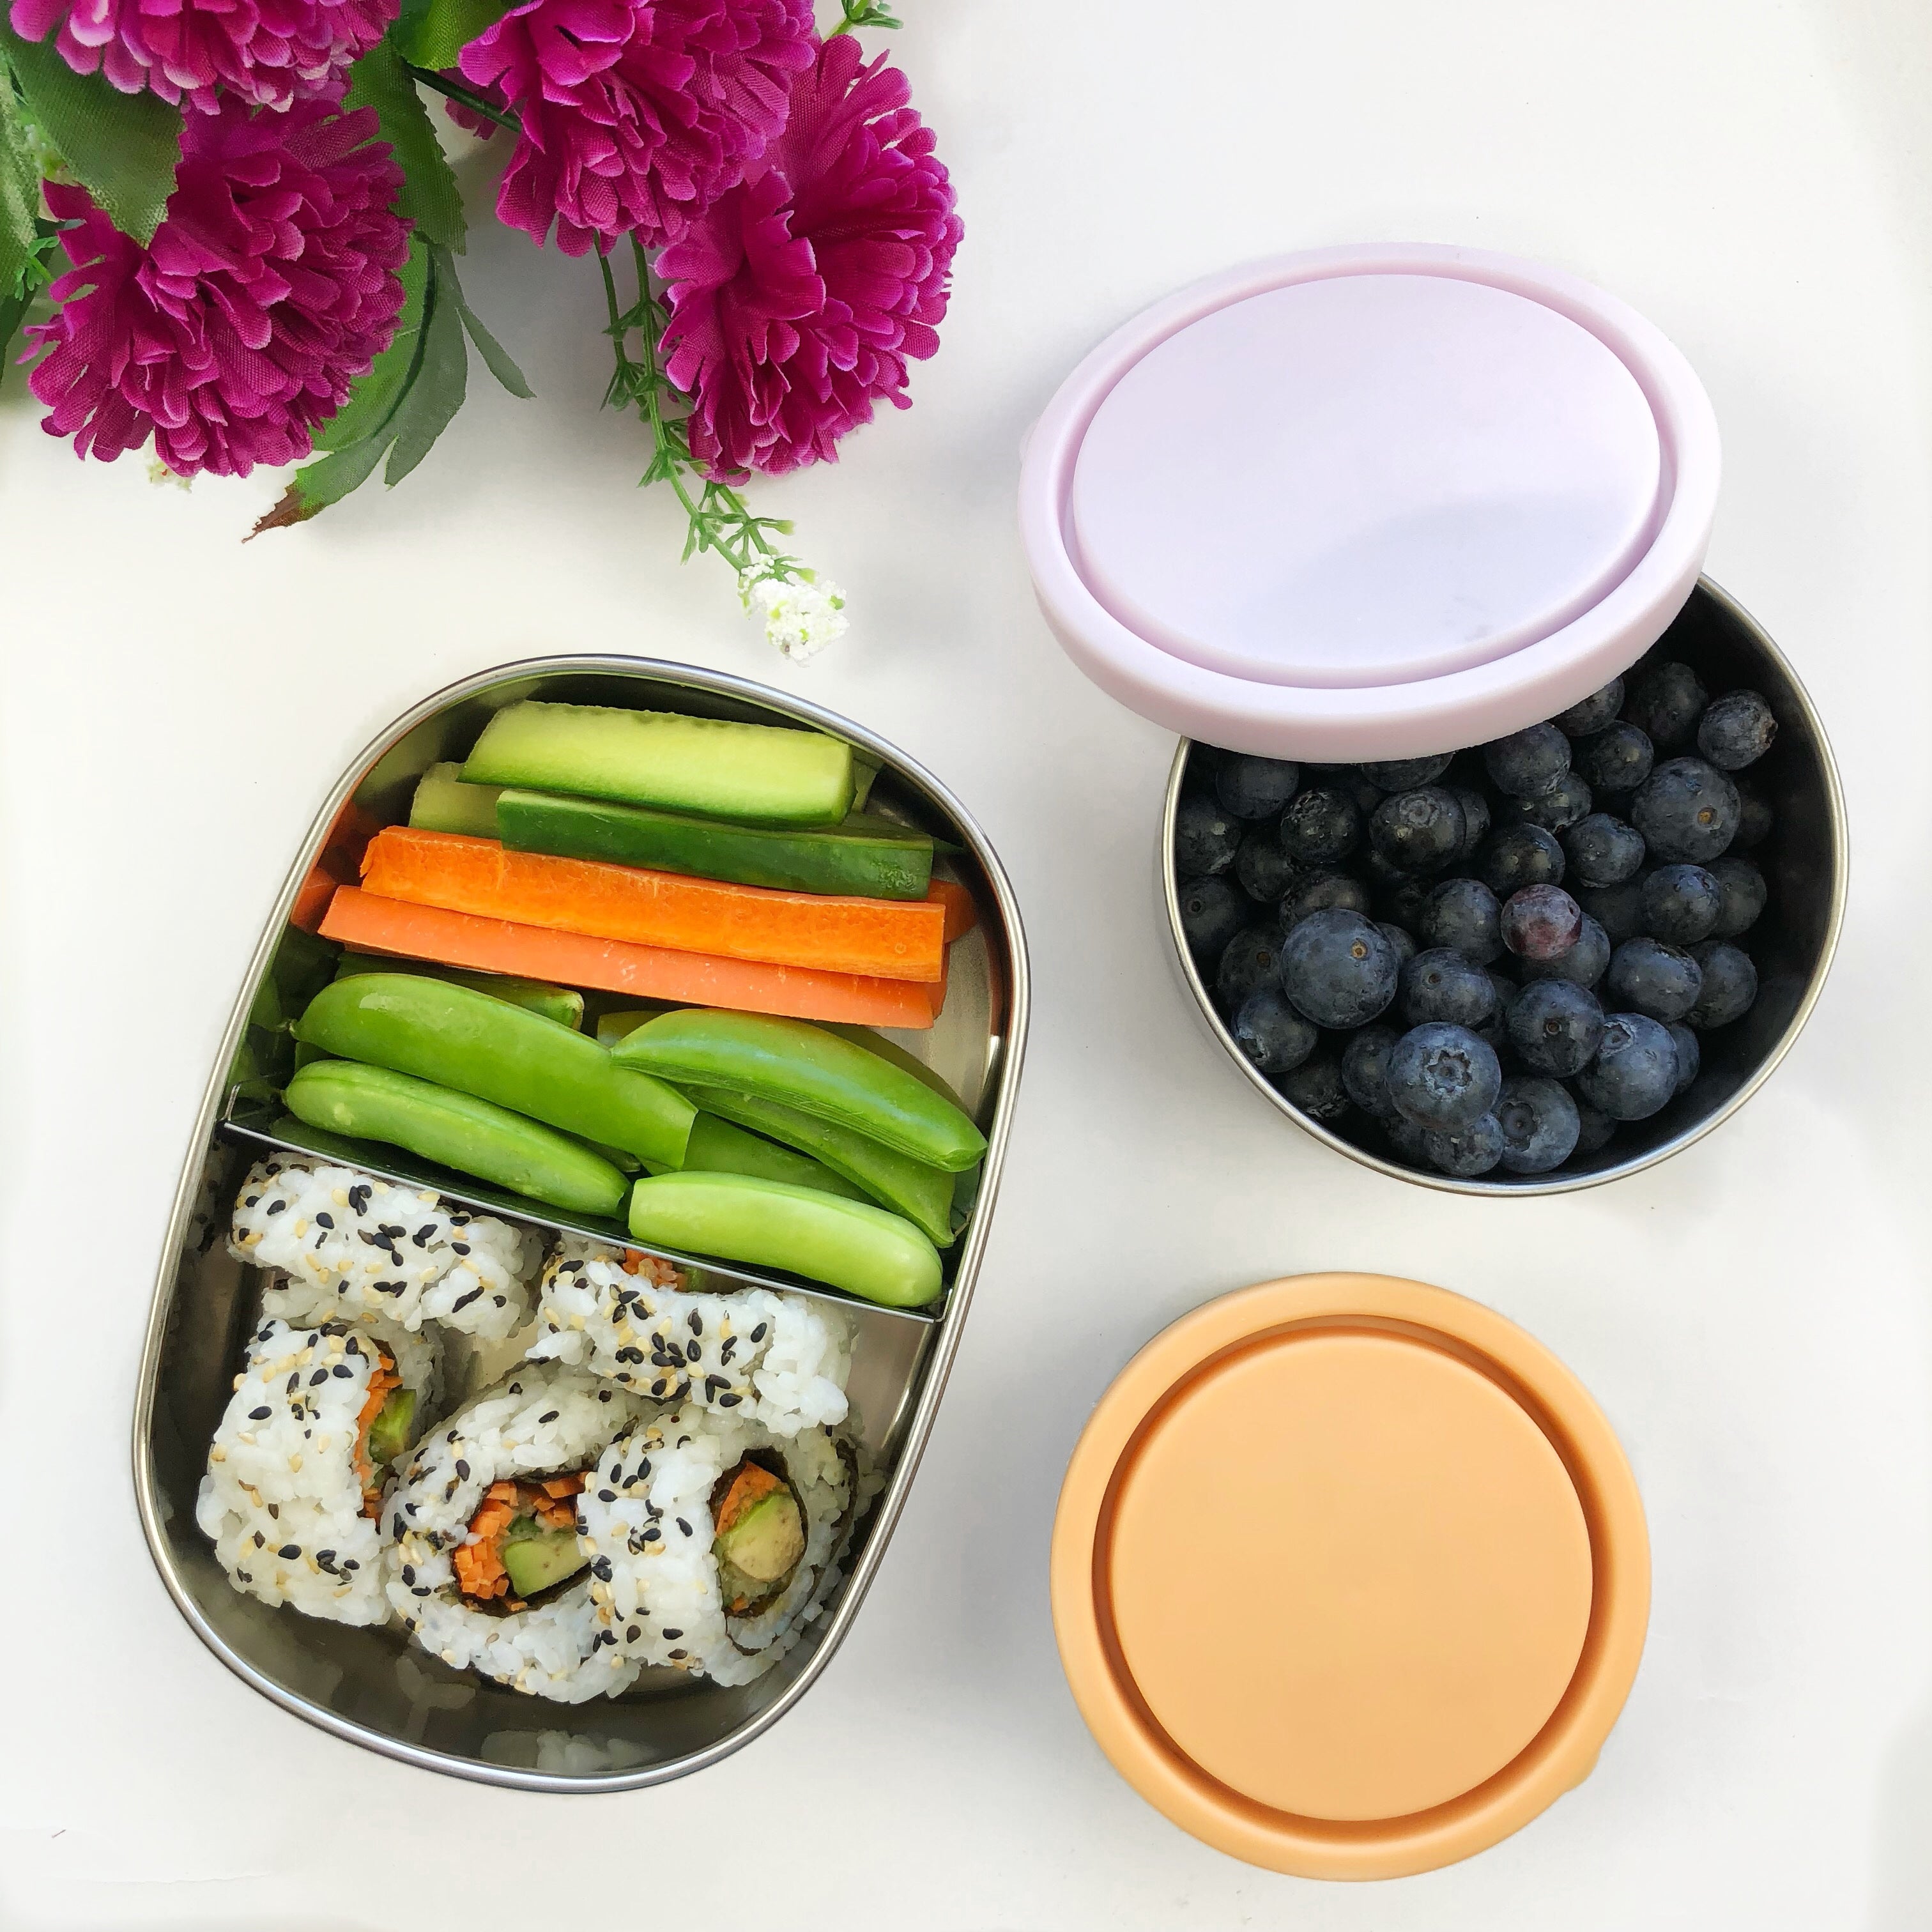 EVER ECO BENTO SNACK BOX - 3 DIVIDERS - The Natural Village